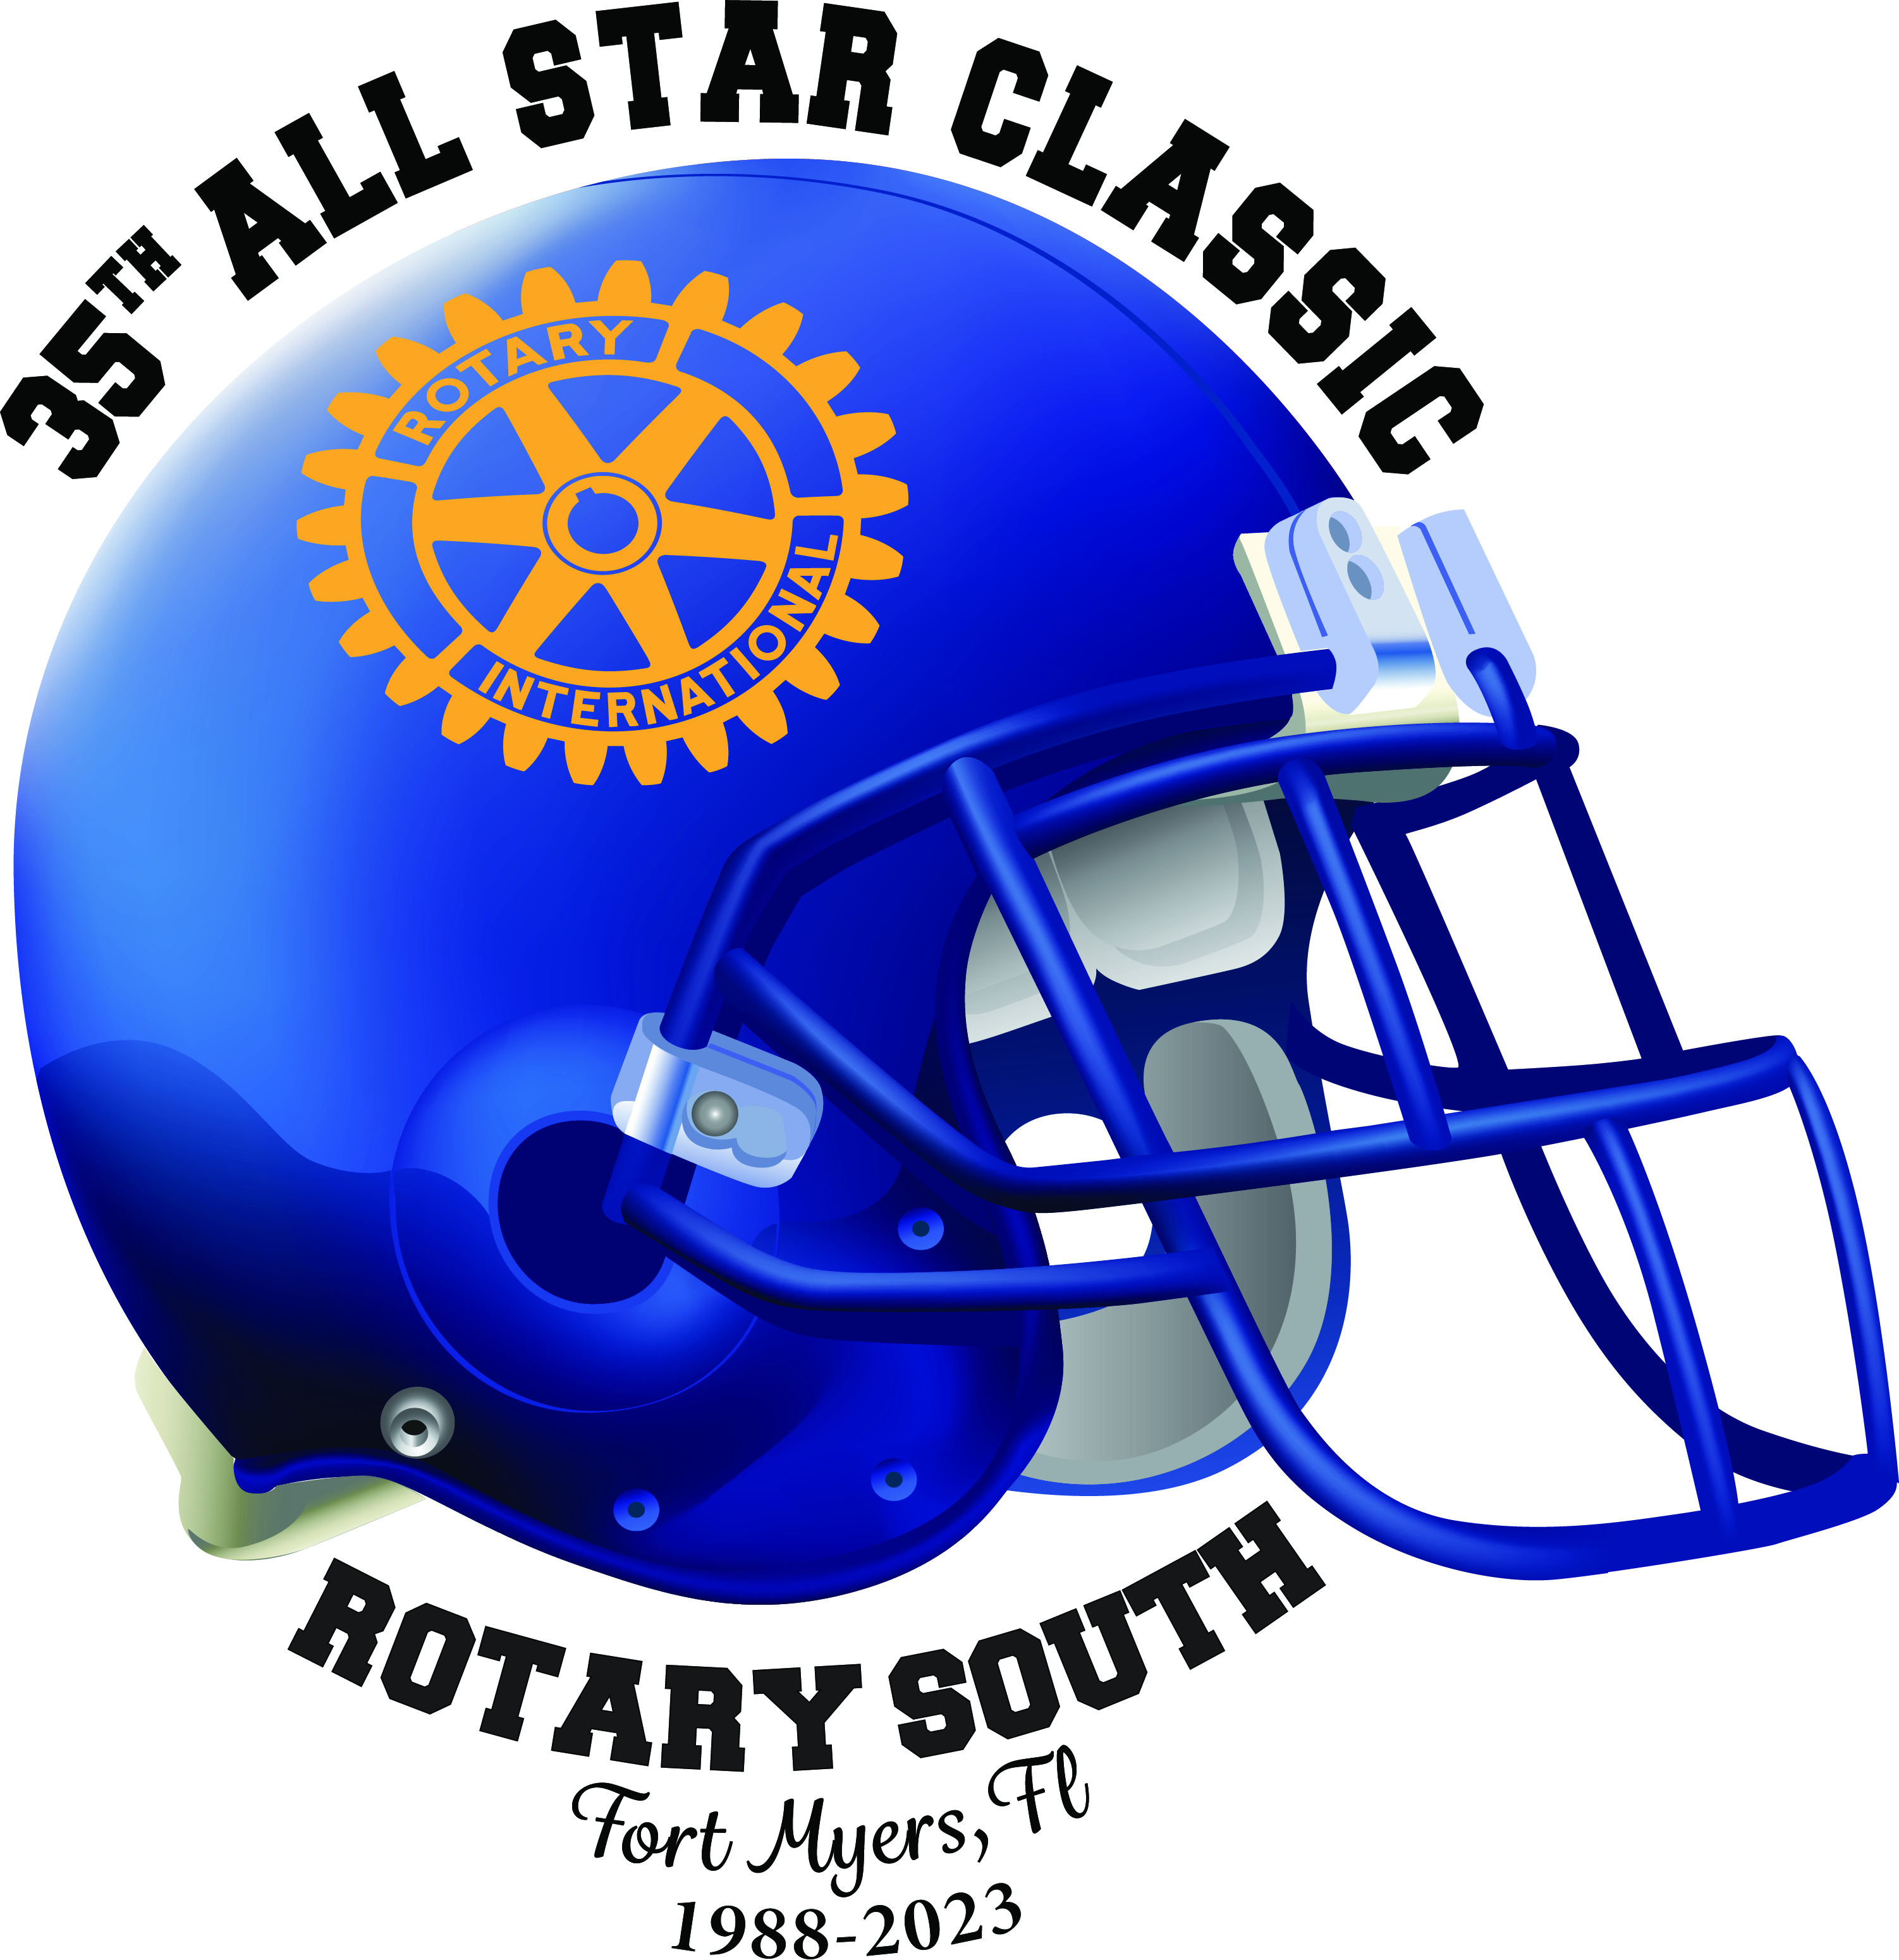 Rotary Club of Ft. Myers South Presents 35th Annual All Star Classic (Banquet 12/11 and Game 12/13)